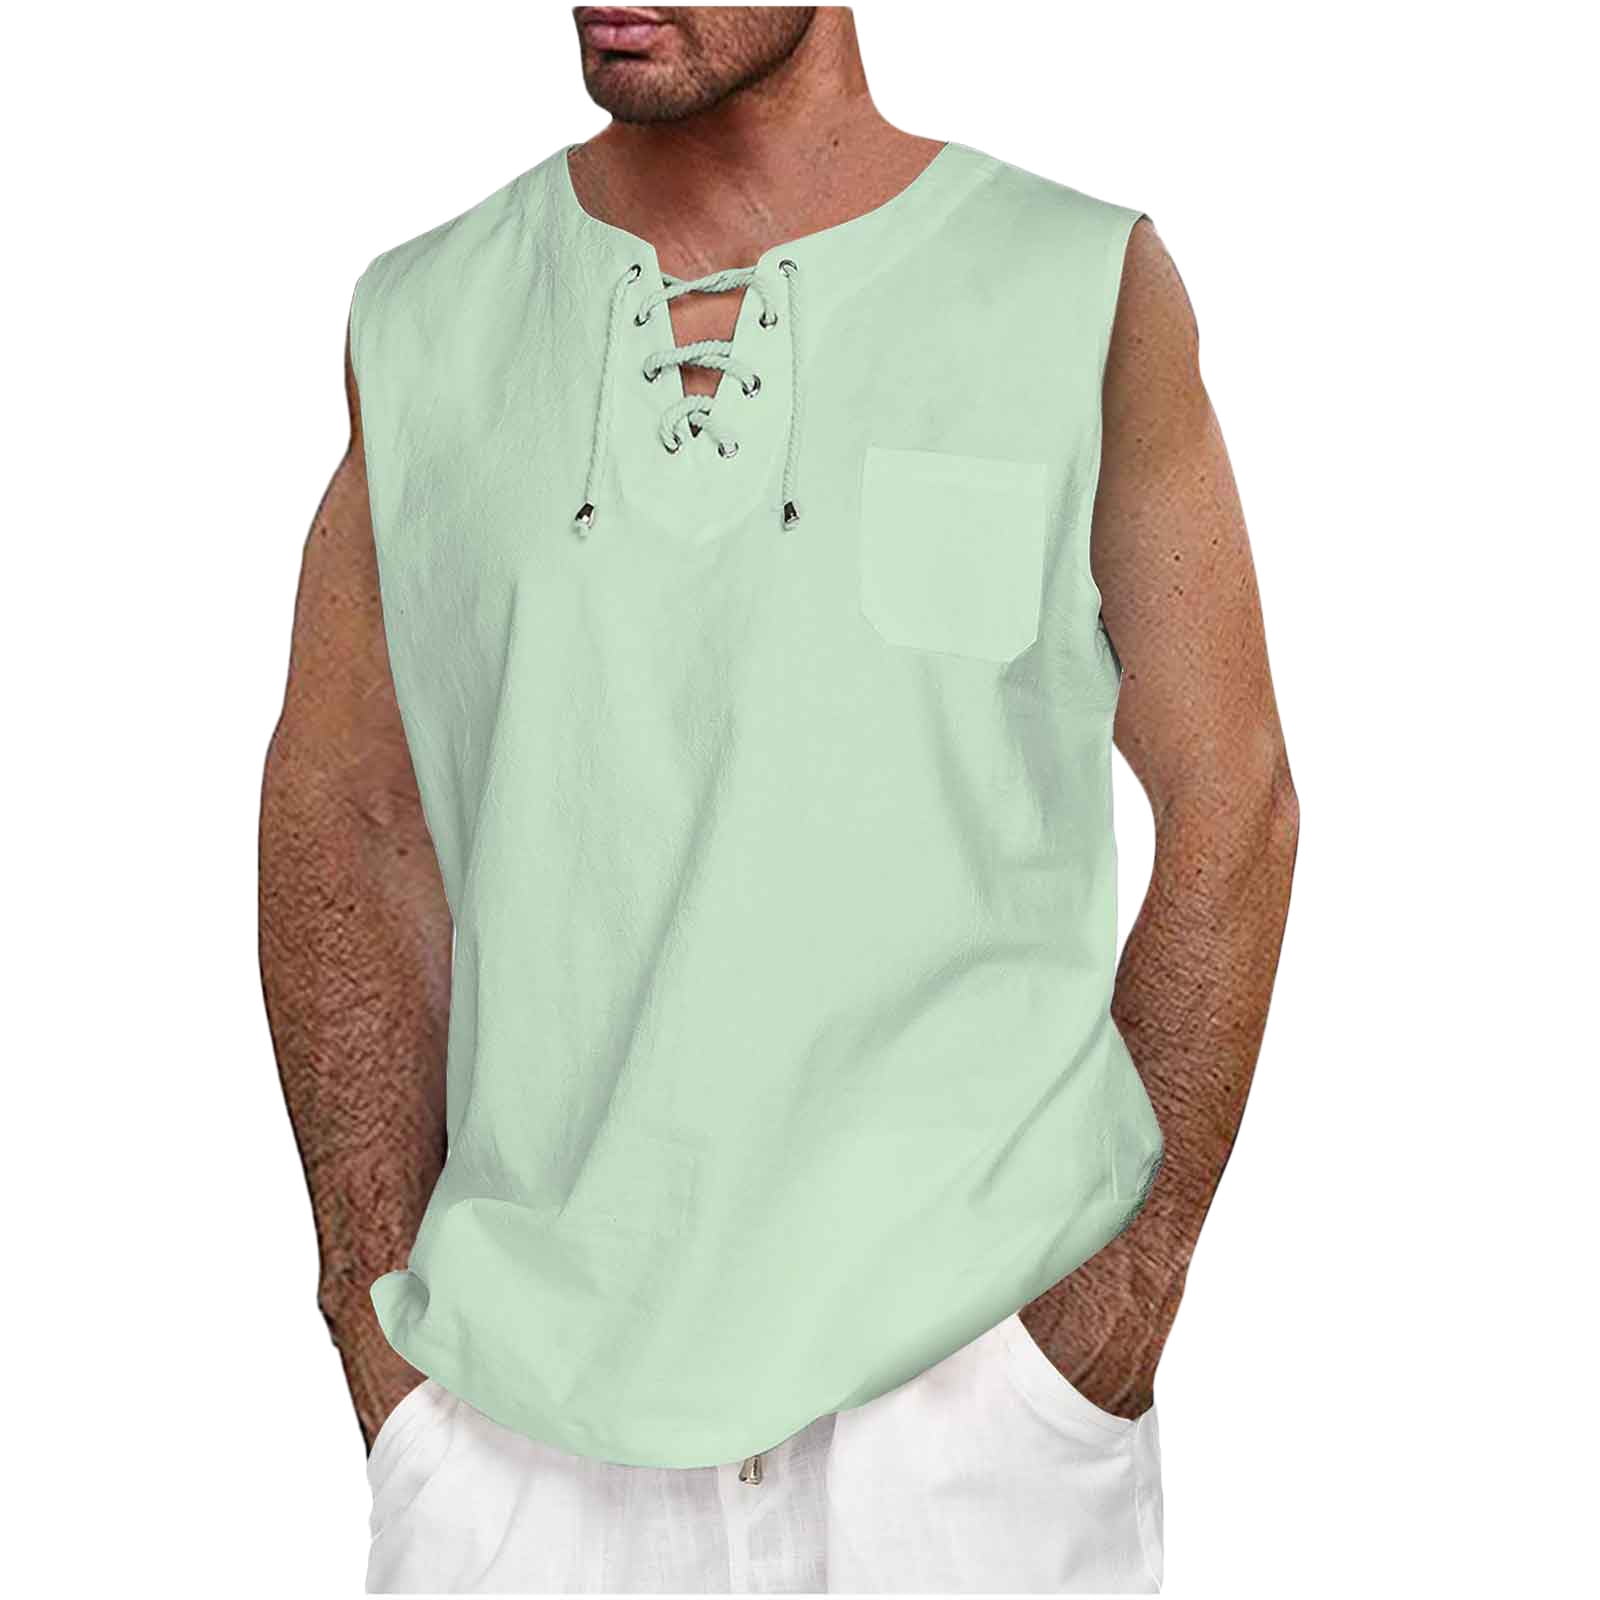 VSSSJ V Neck Lace-Up Tank Top for Men Big and Tall Solid Color Front Pocket  Sleeveless Shirts Relax Summer Breathable Quick Dry Vest Light Blue XXXXL 